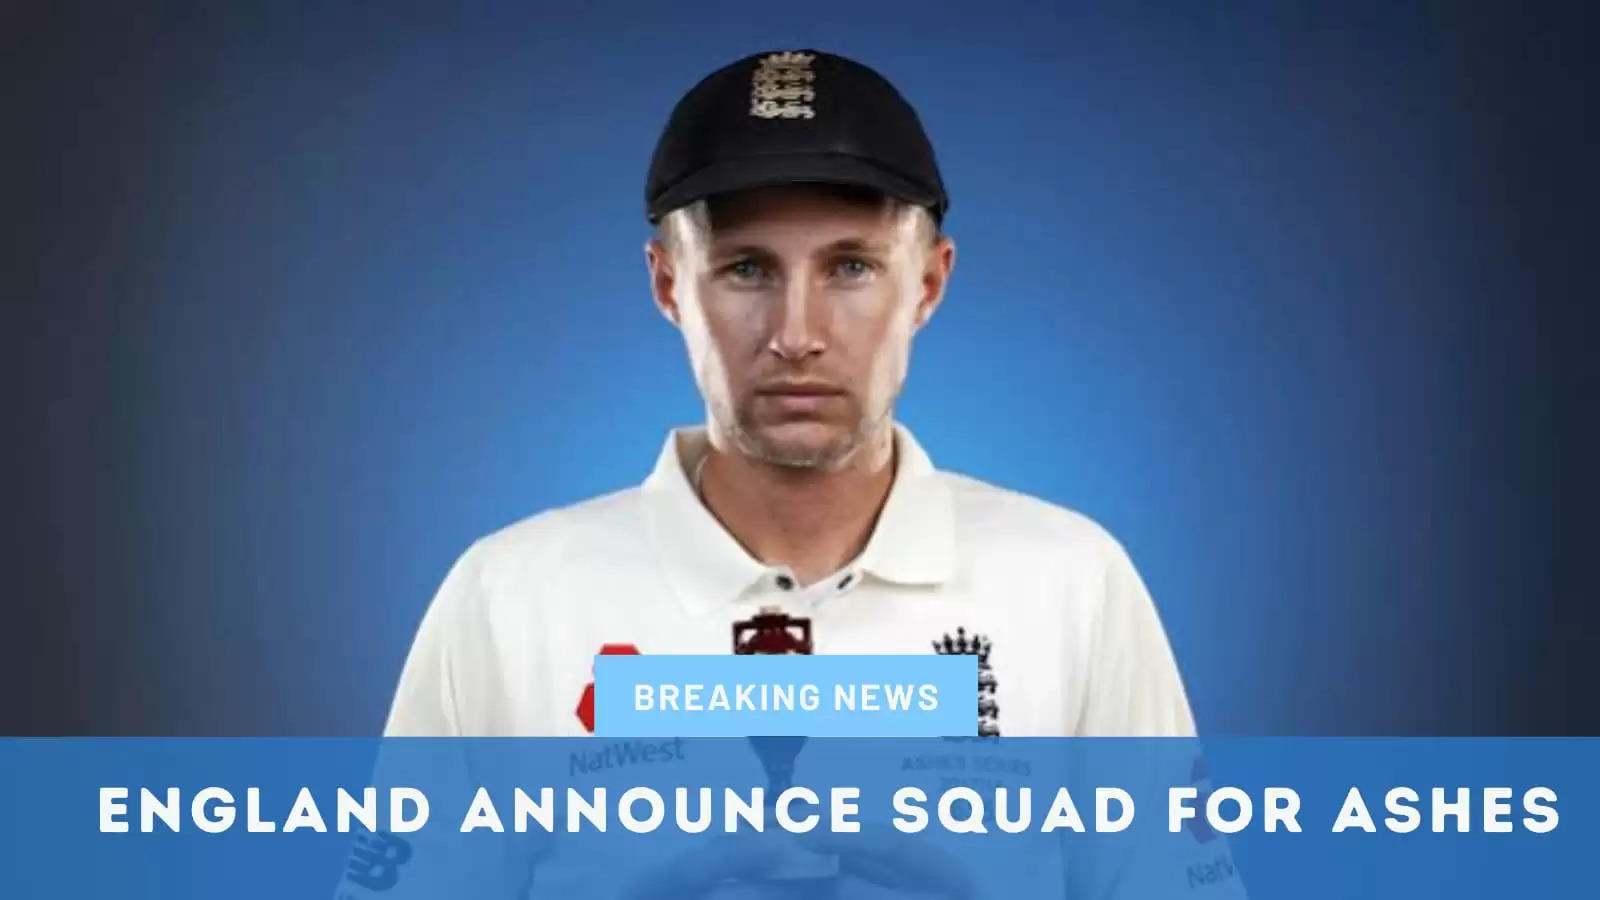 Ashes 2021 England squad: Ben Stokes continues indefinite break as England announce squad for tour of Australia